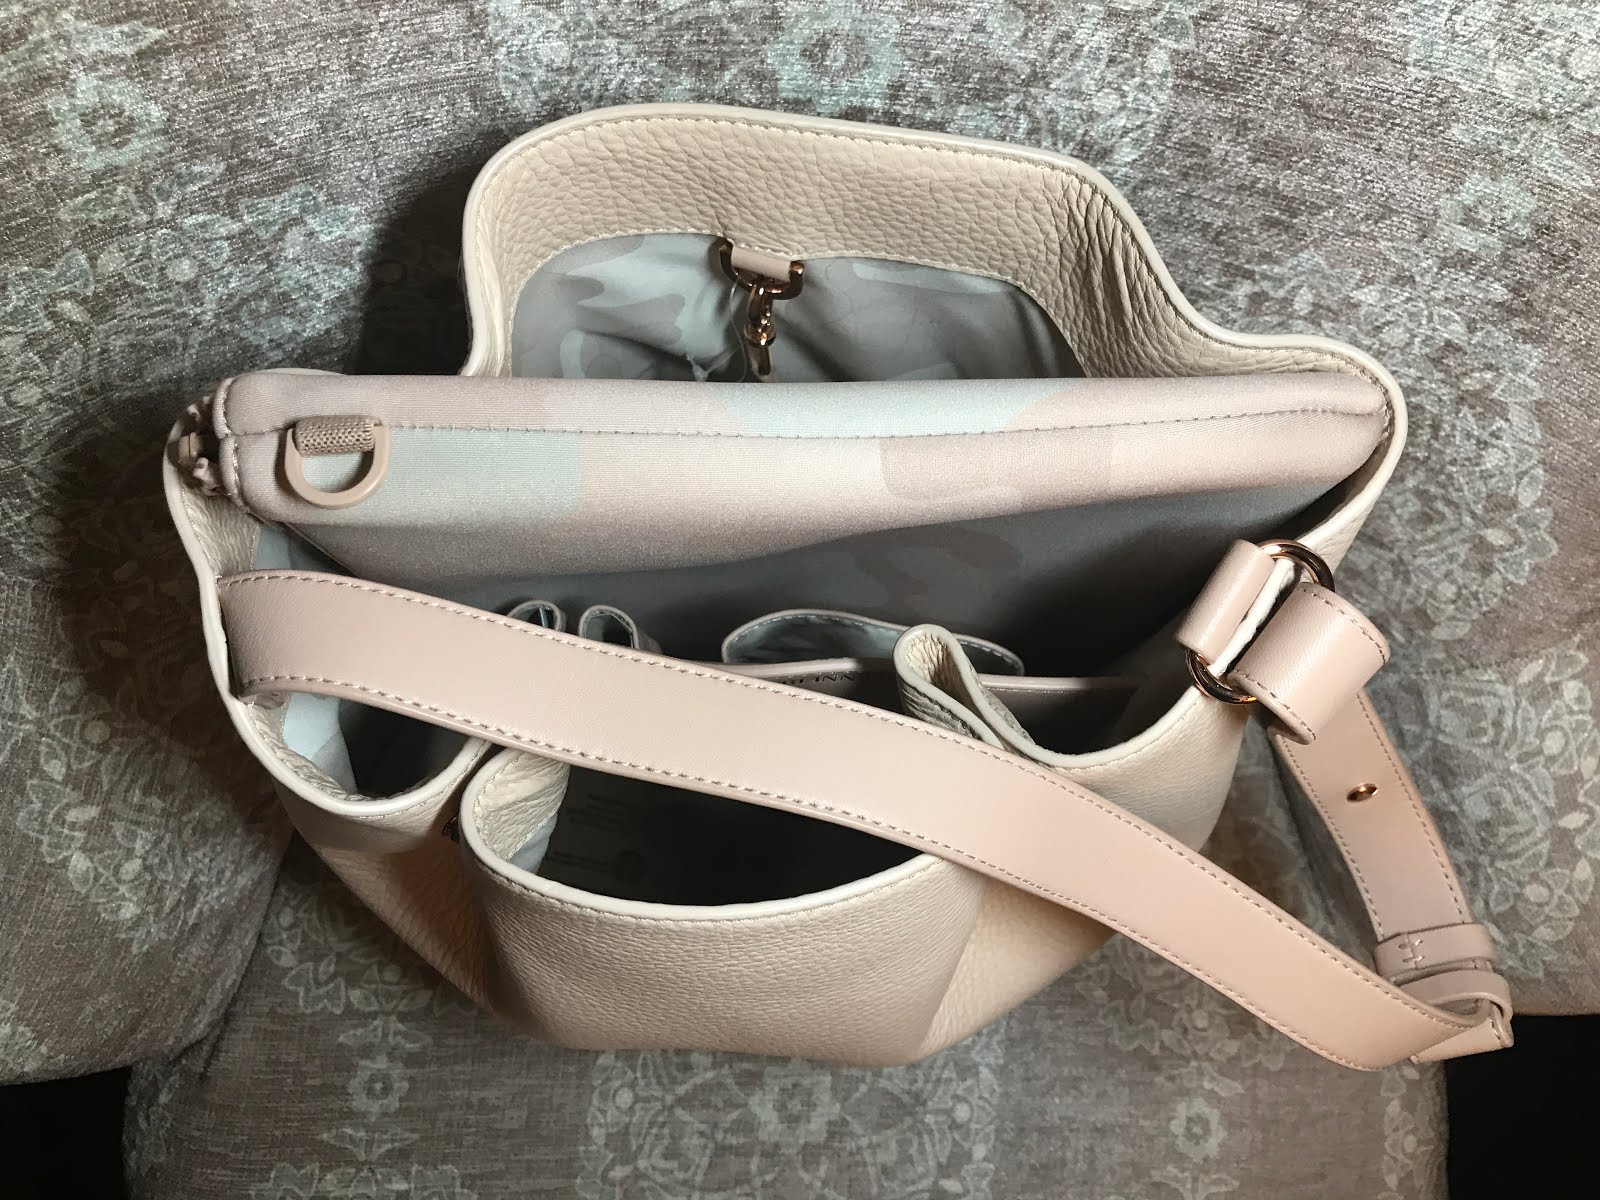 Totes Dagne: Dagne Dover Skye Essentials Pouch & Rae Roll-Top Dry Bag:  First Impressions